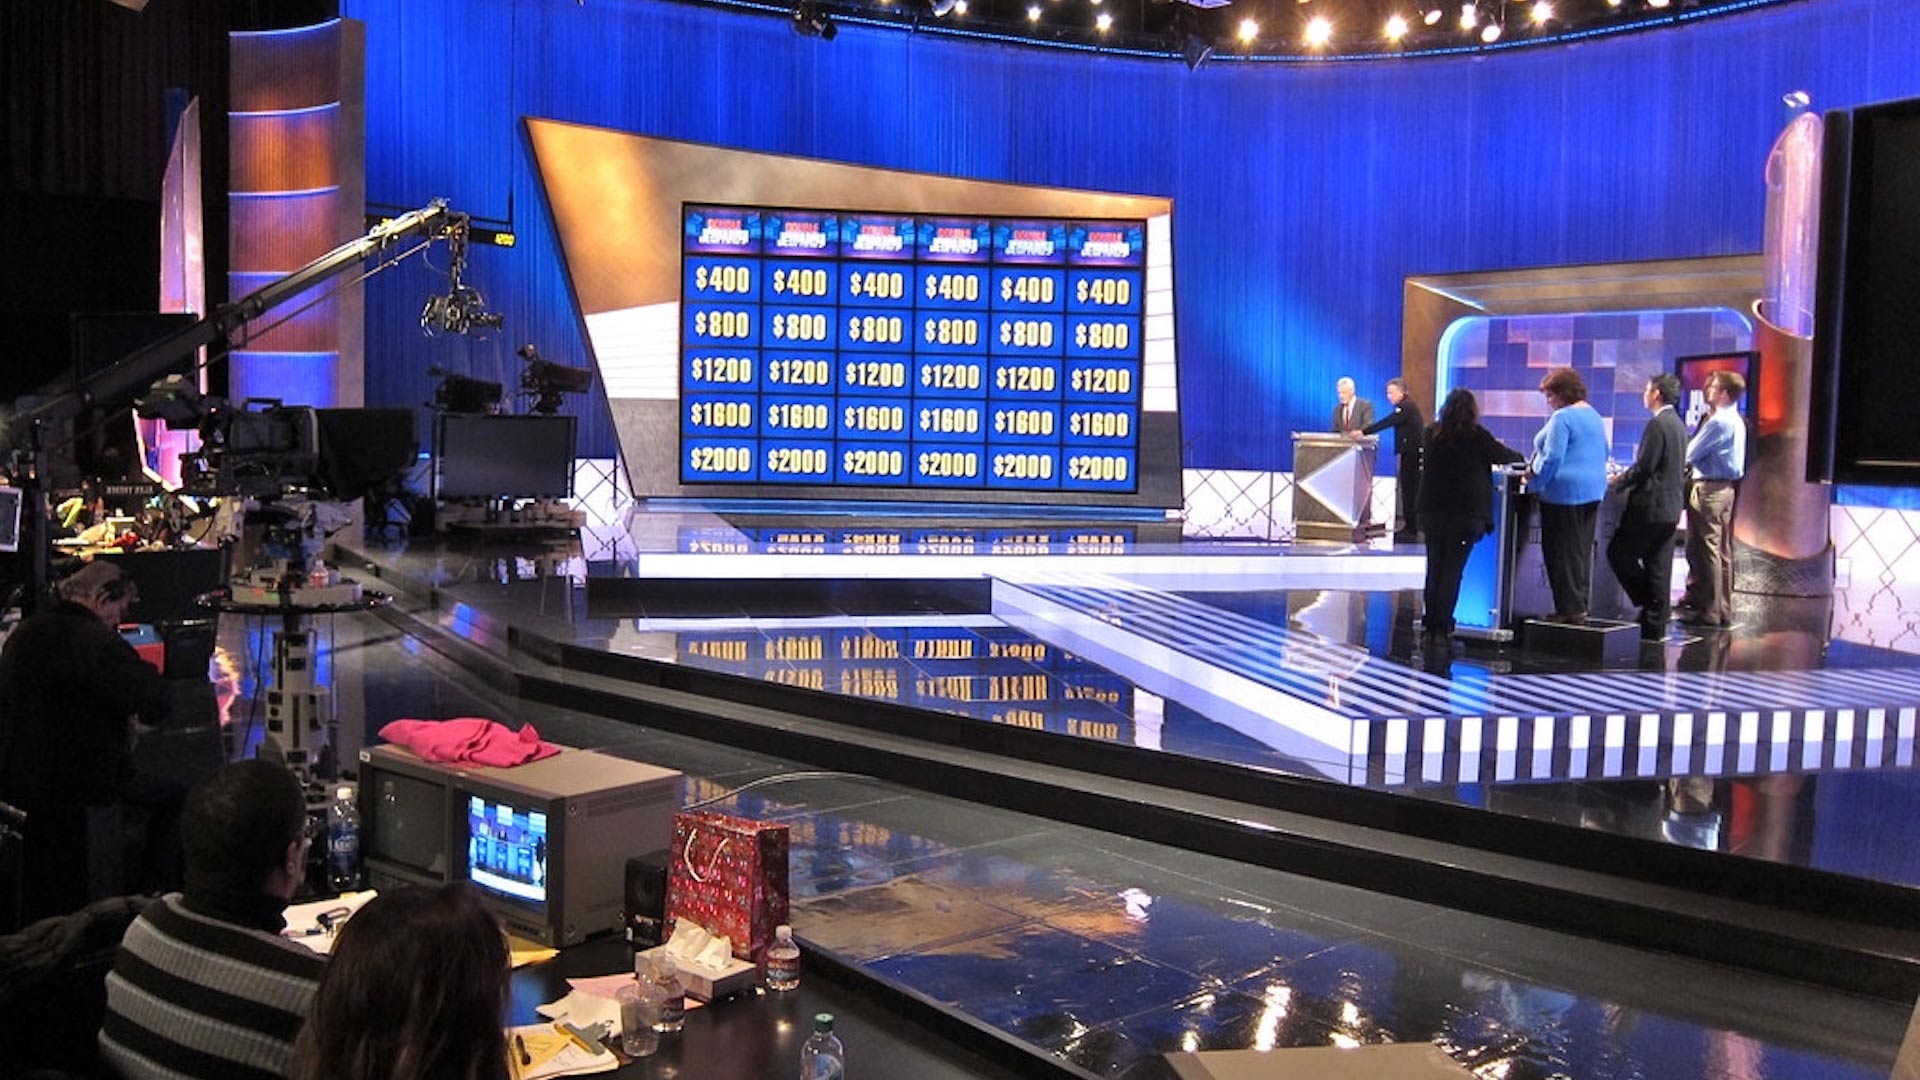 Behind the scenes at TV game show Jeopardy.